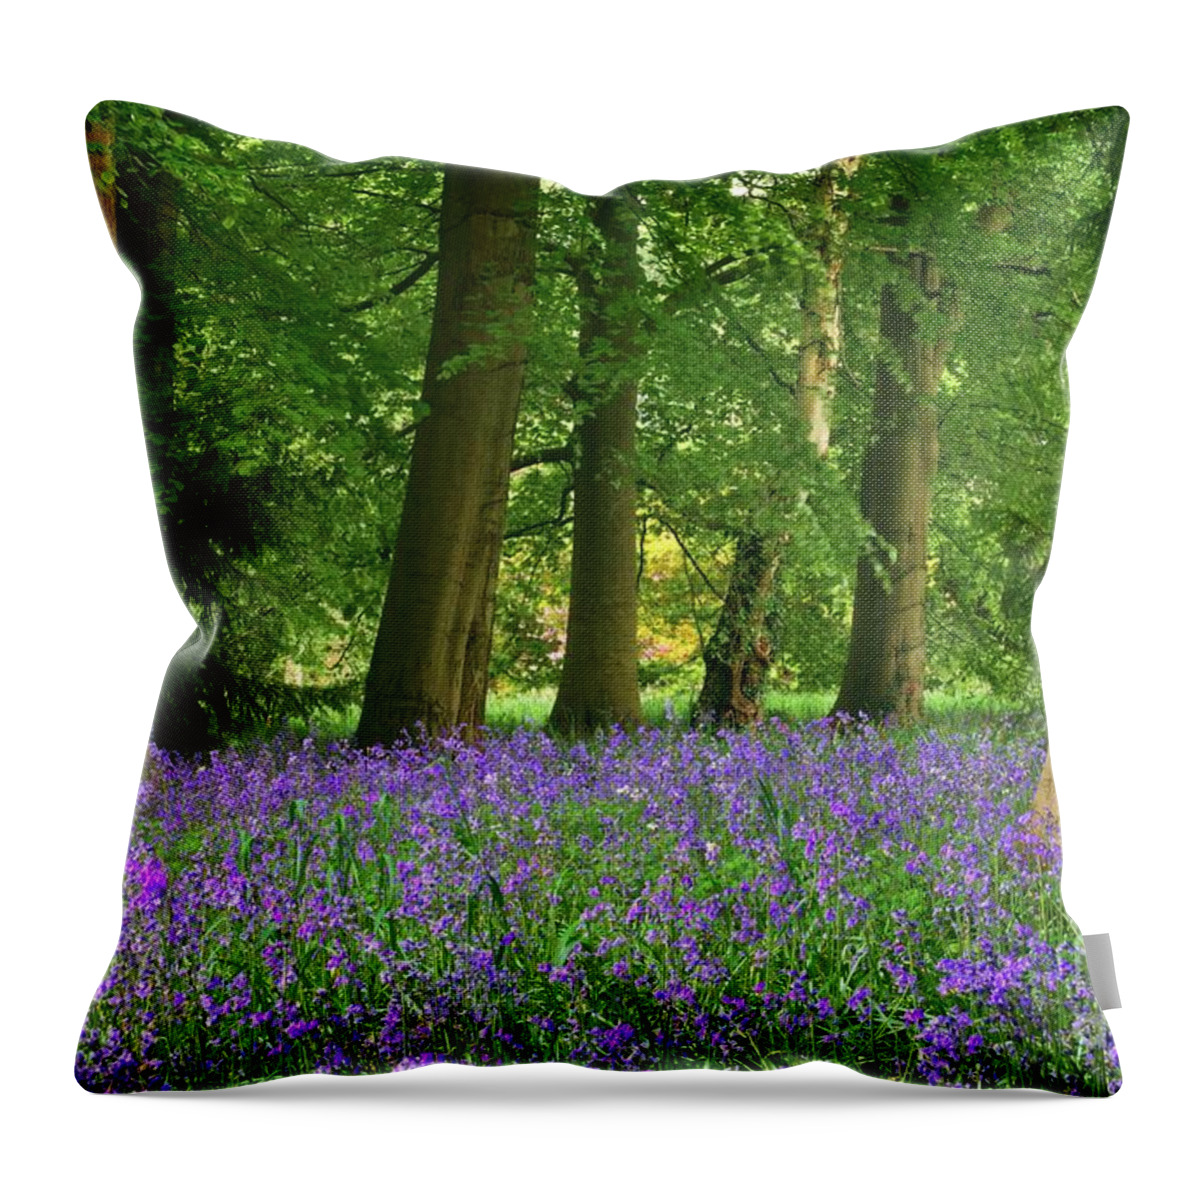 Bluebells Throw Pillow featuring the photograph English Bluebell Woodland by Martyn Arnold